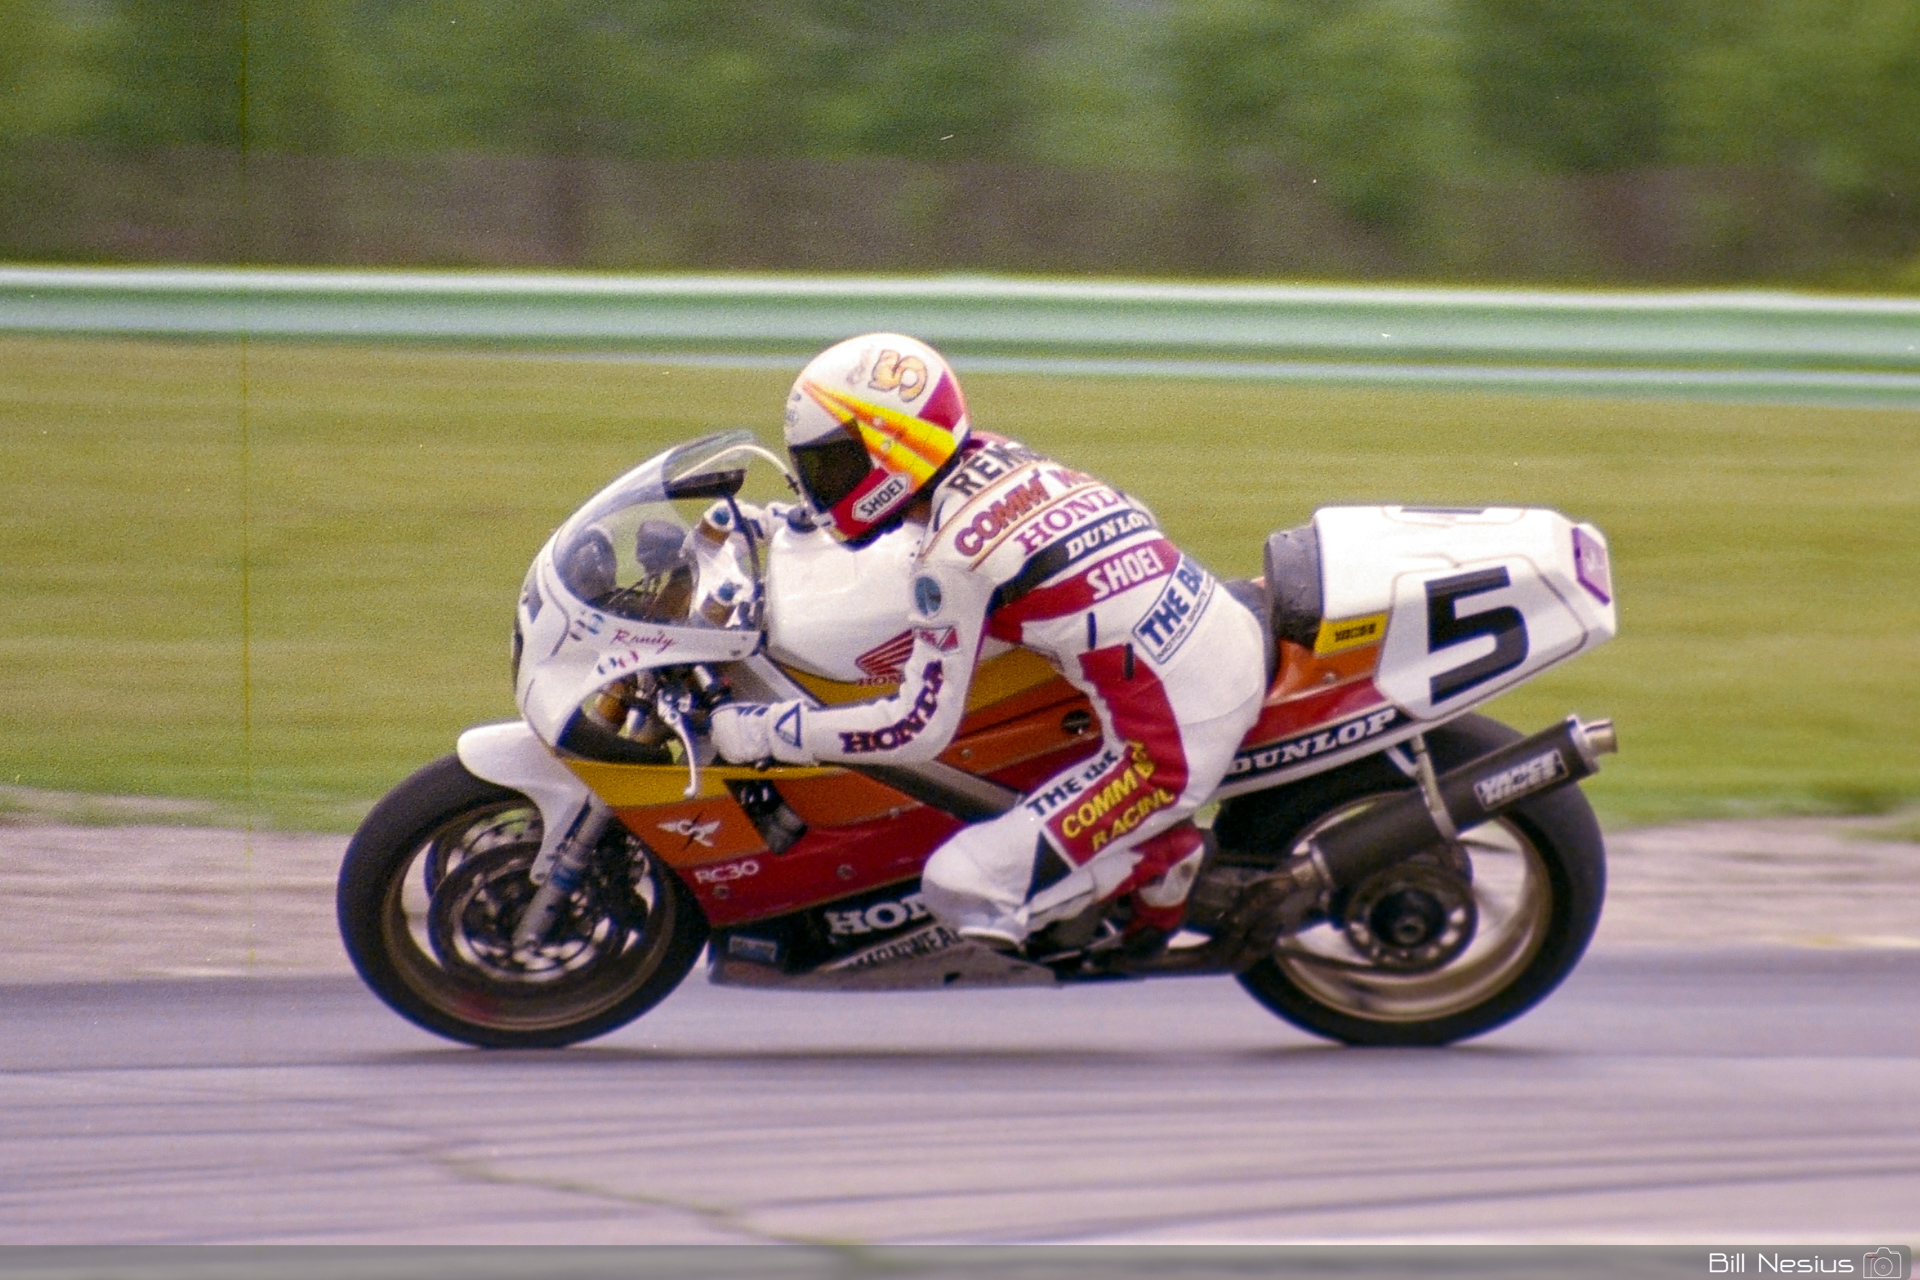 Randy Renfrow on the Number 5 Commonwealth Racing Honda RC30 / FLM_7306 / 3